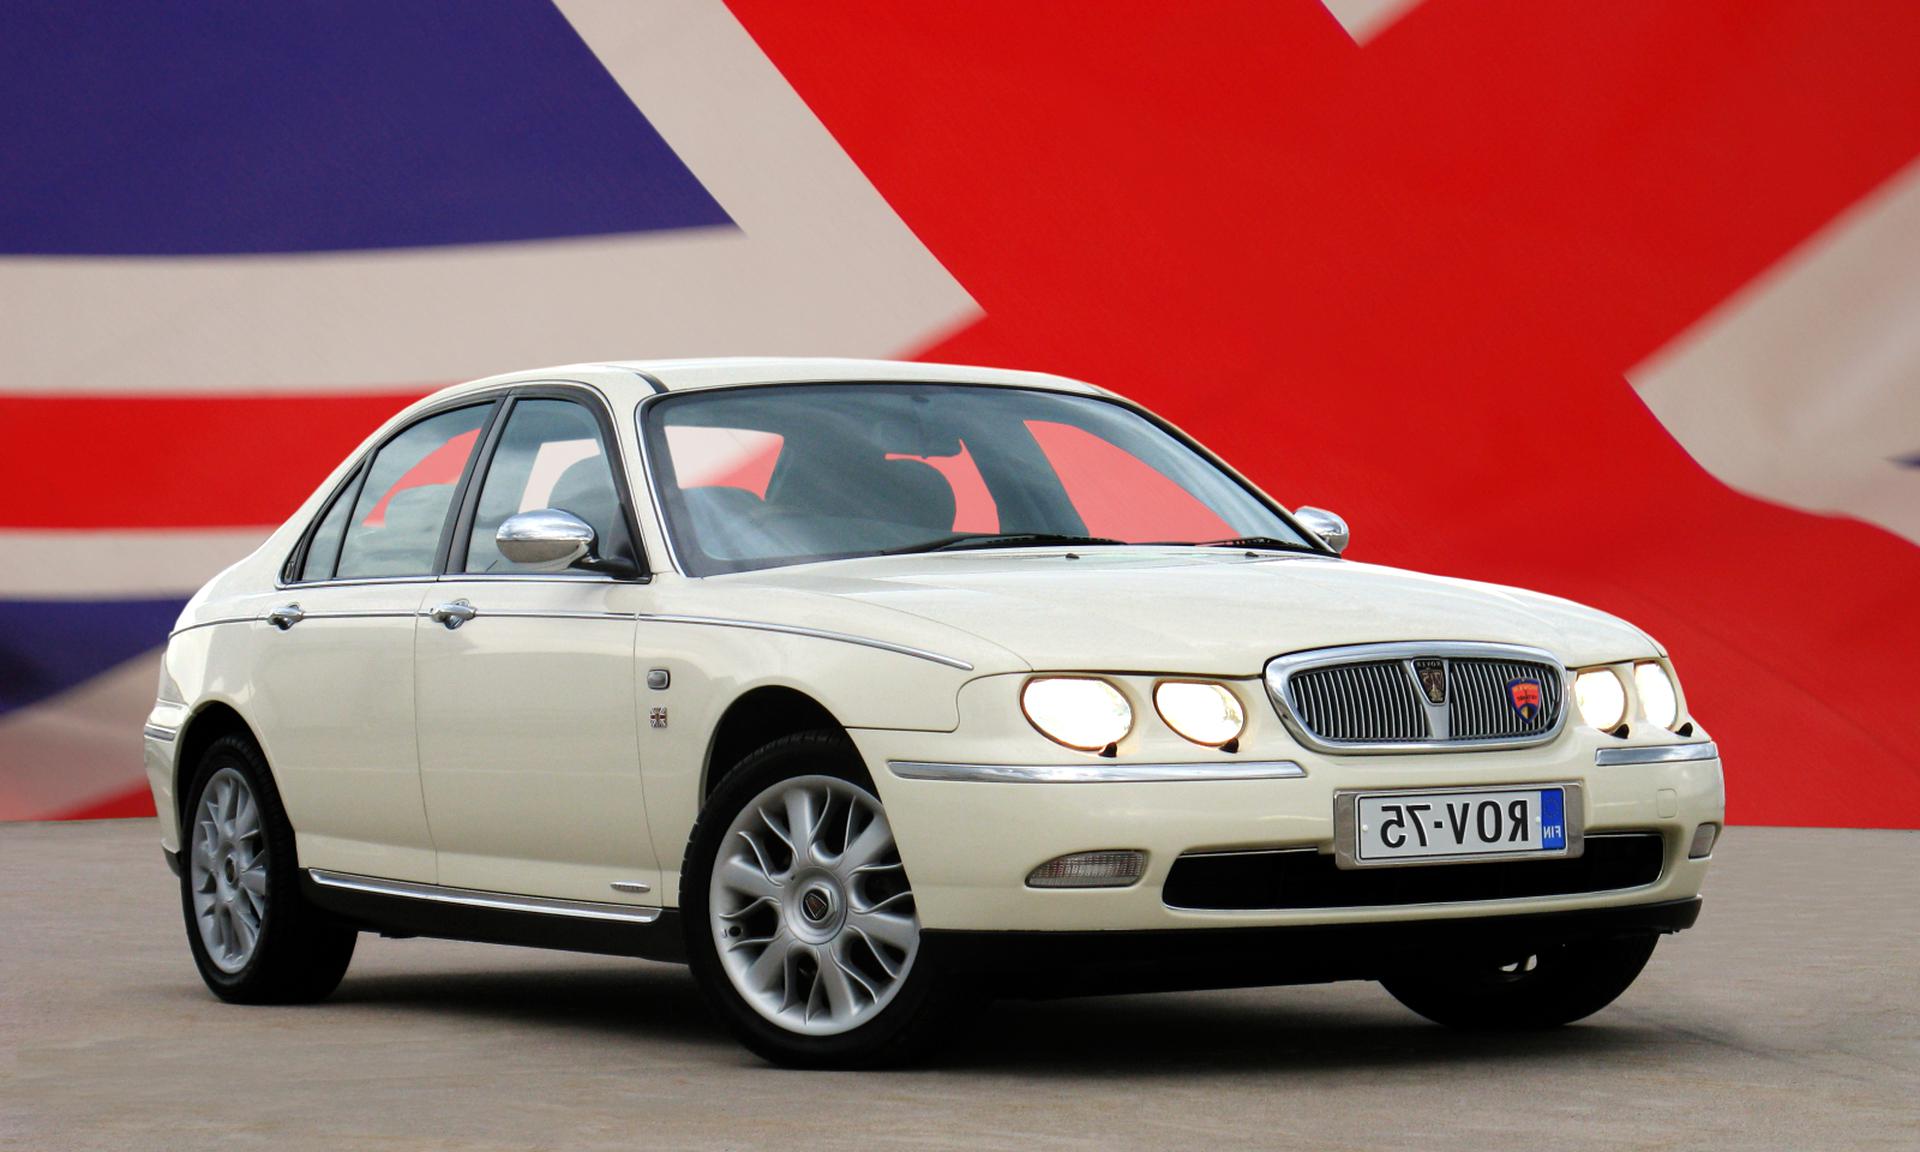 Rover 75 for sale in UK 101 secondhand Rover 75